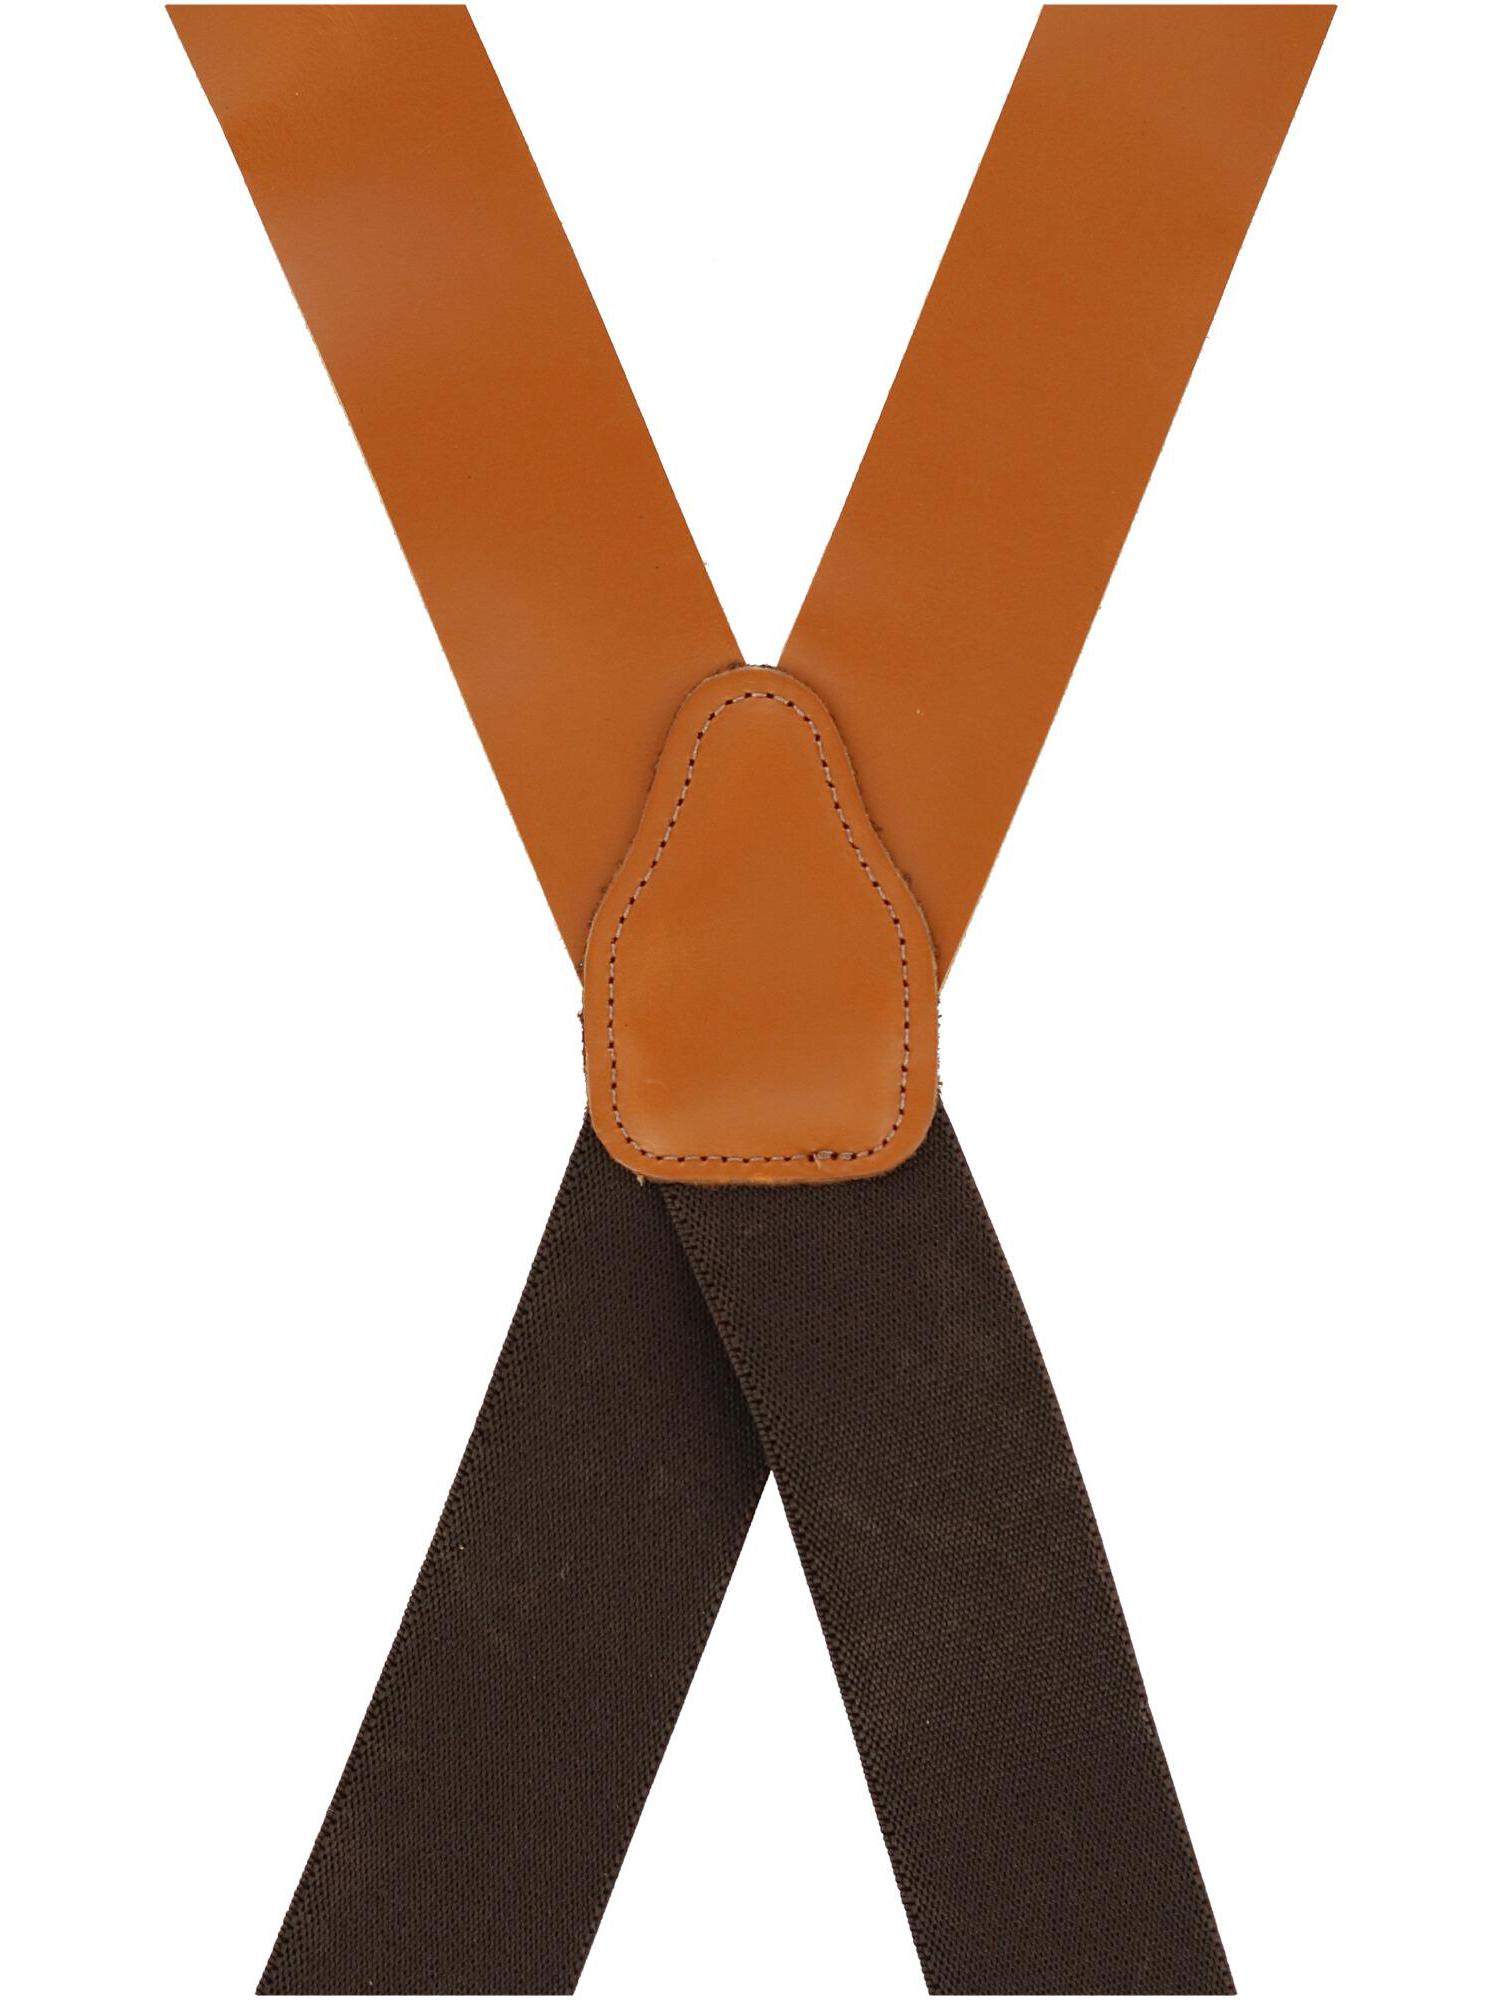 CTM  Smooth Coated Leather Wide Width Suspenders with Metal Swivel Hook Ends - image 3 of 4